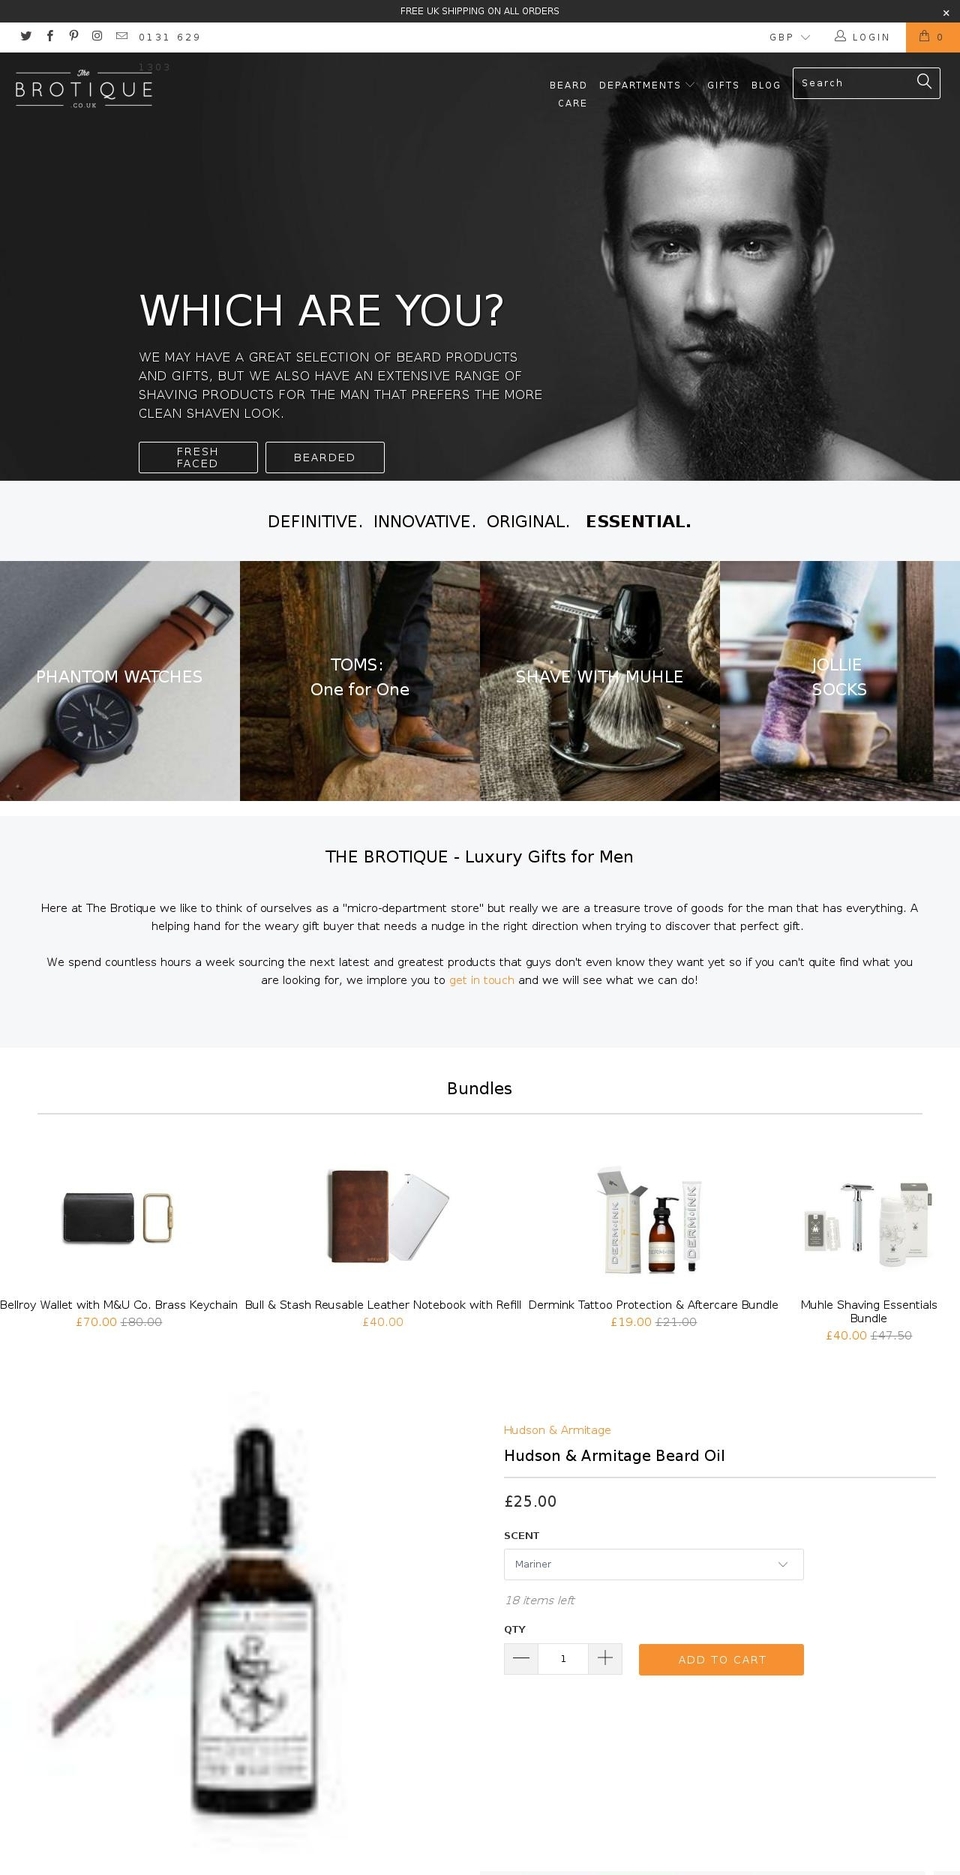 December Shopify theme site example thebrotique.co.uk